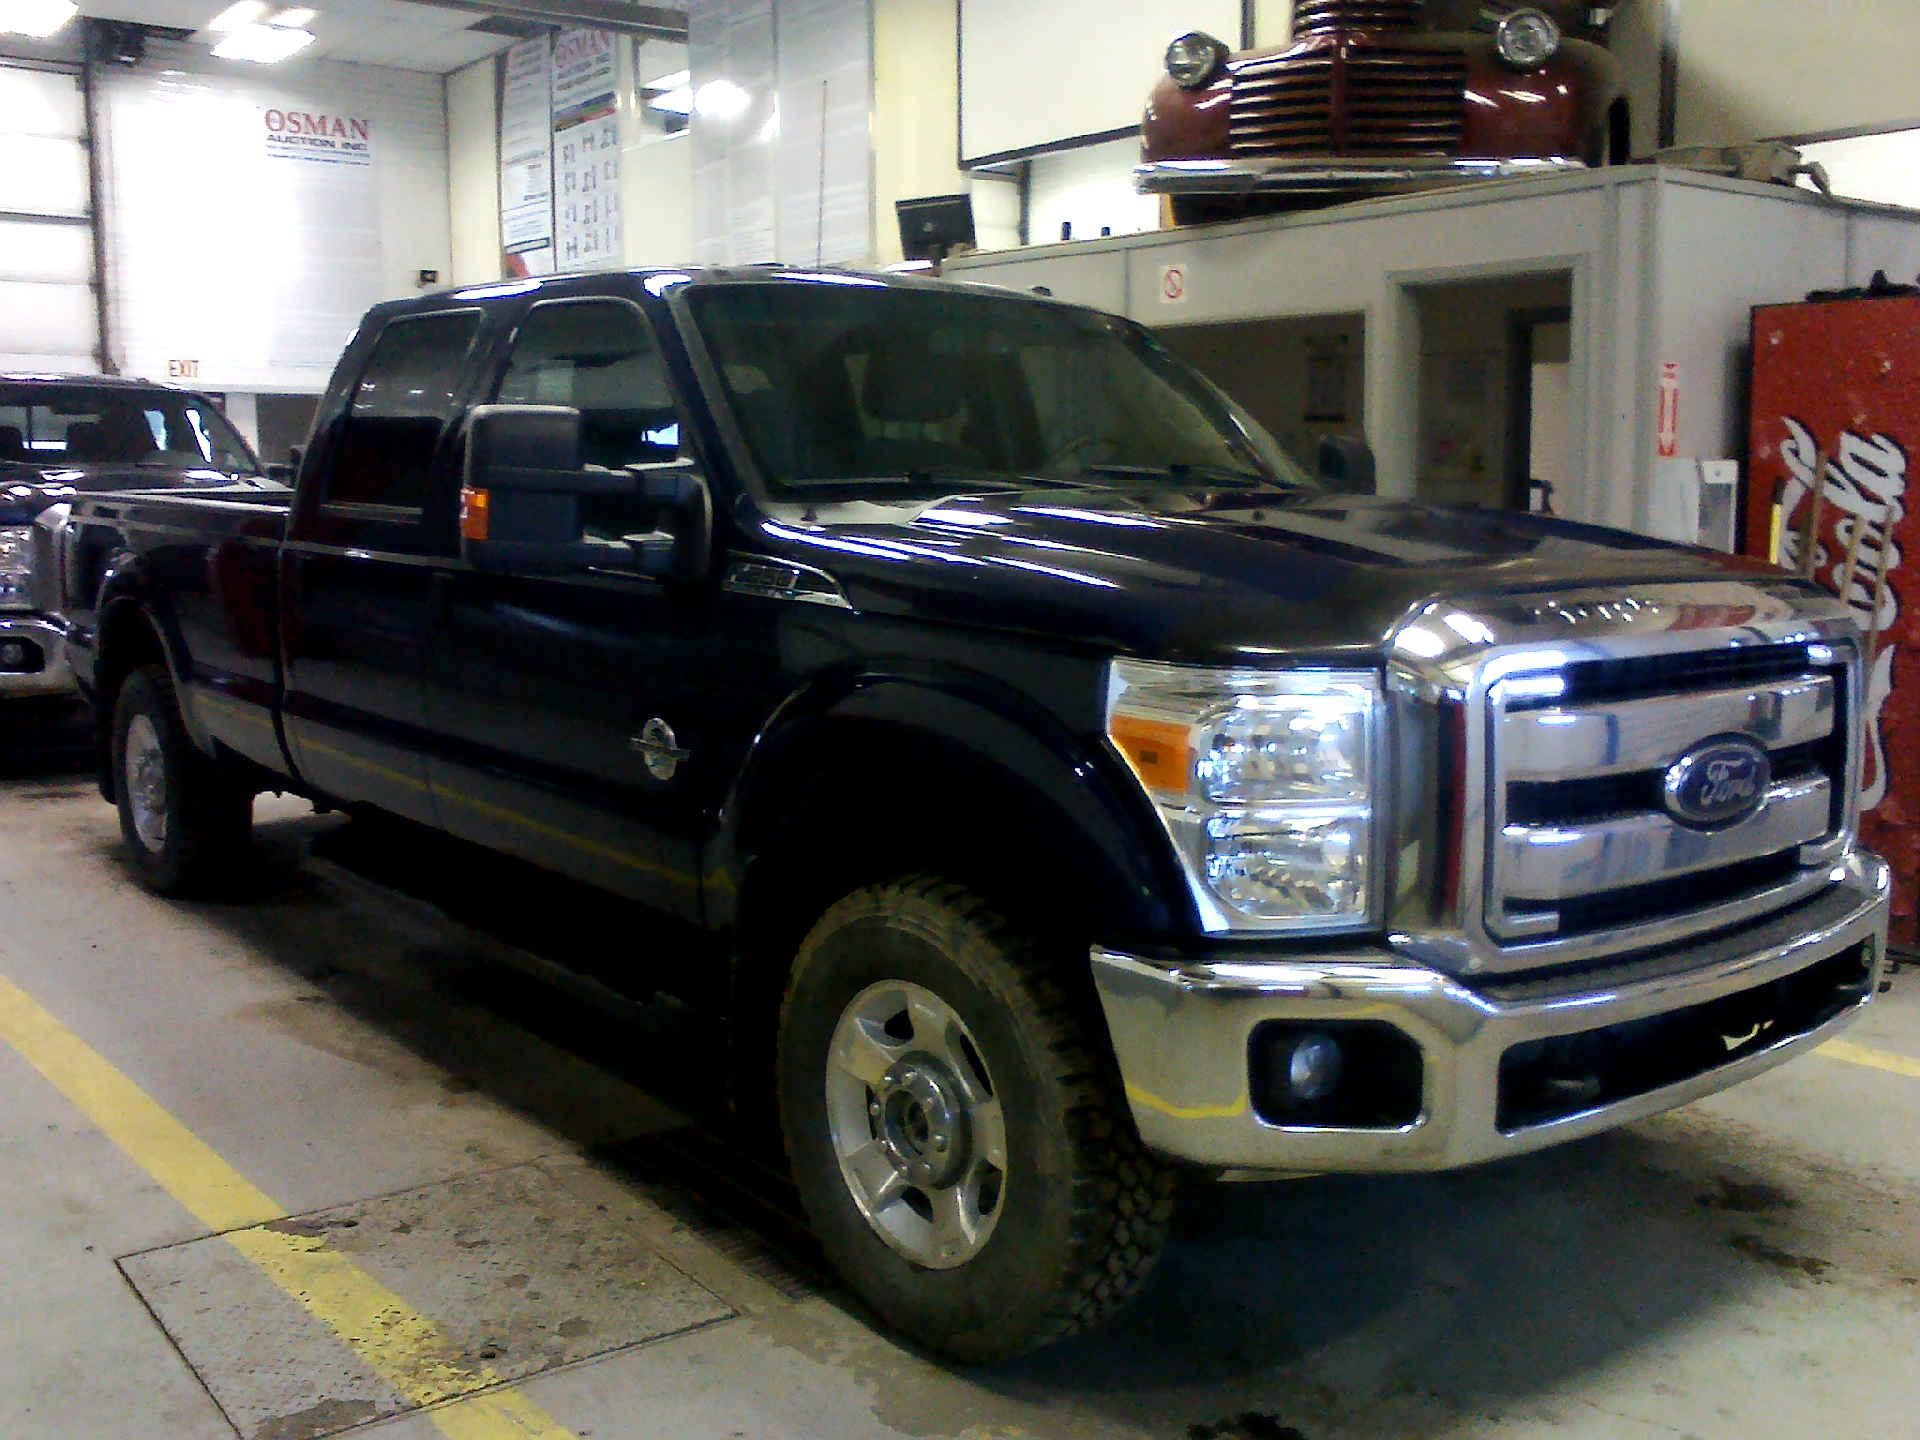 2012 FORD F-250 SD XLT CREW CAB 4WD 6.7L V8 OHV 16V DIESEL 5-SPD AUTOMATIC SN:1FT7W2BT4CEA94469 - Image 3 of 9